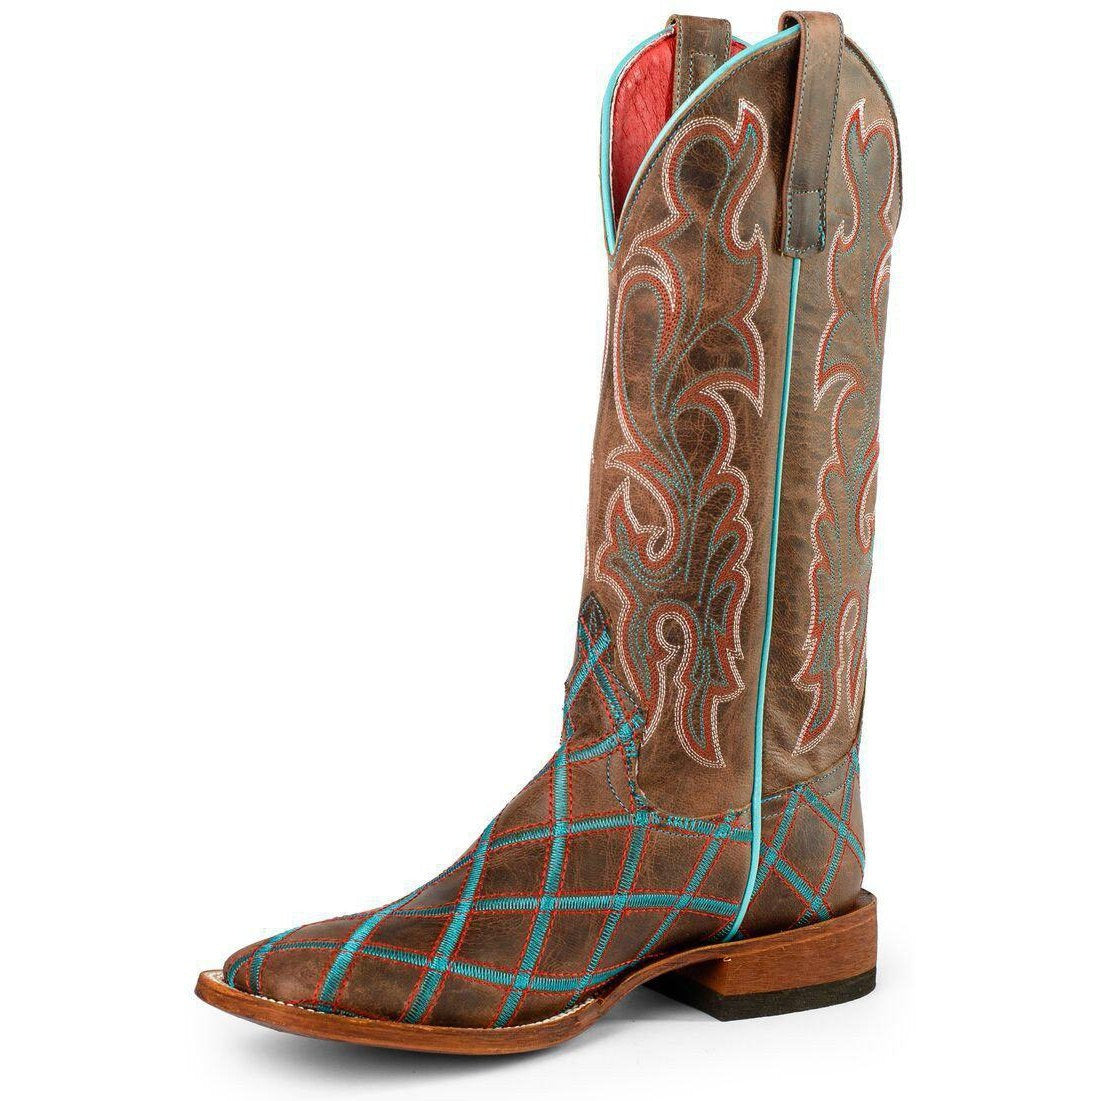 Macie Bean Tilt A Whirl Cowgirl Boots - West 20 Saddle Co.